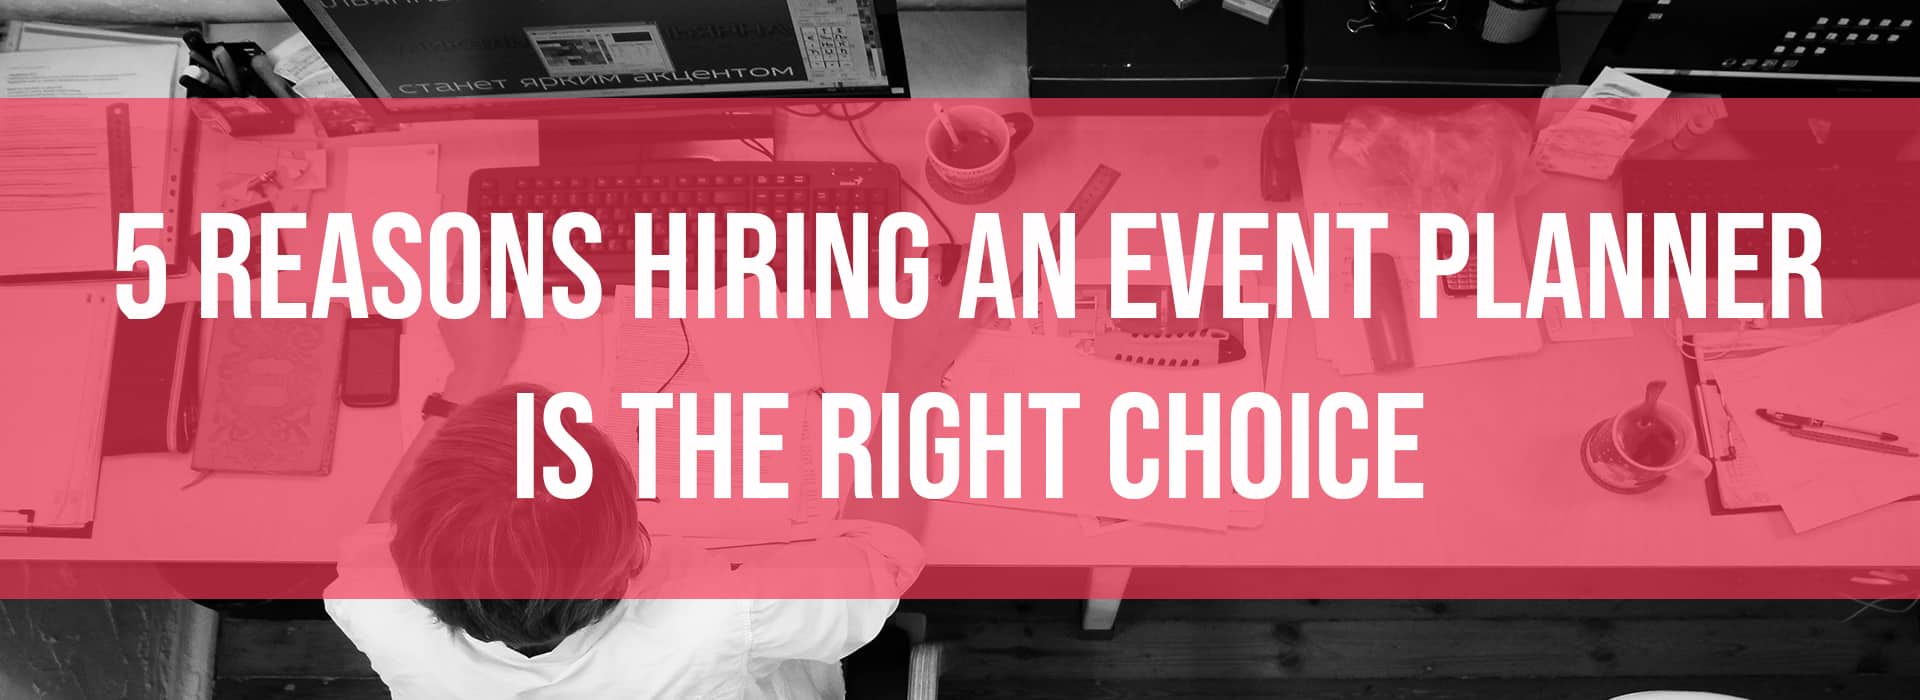 5 Reasons Hiring an Event Planner is the Right Choice